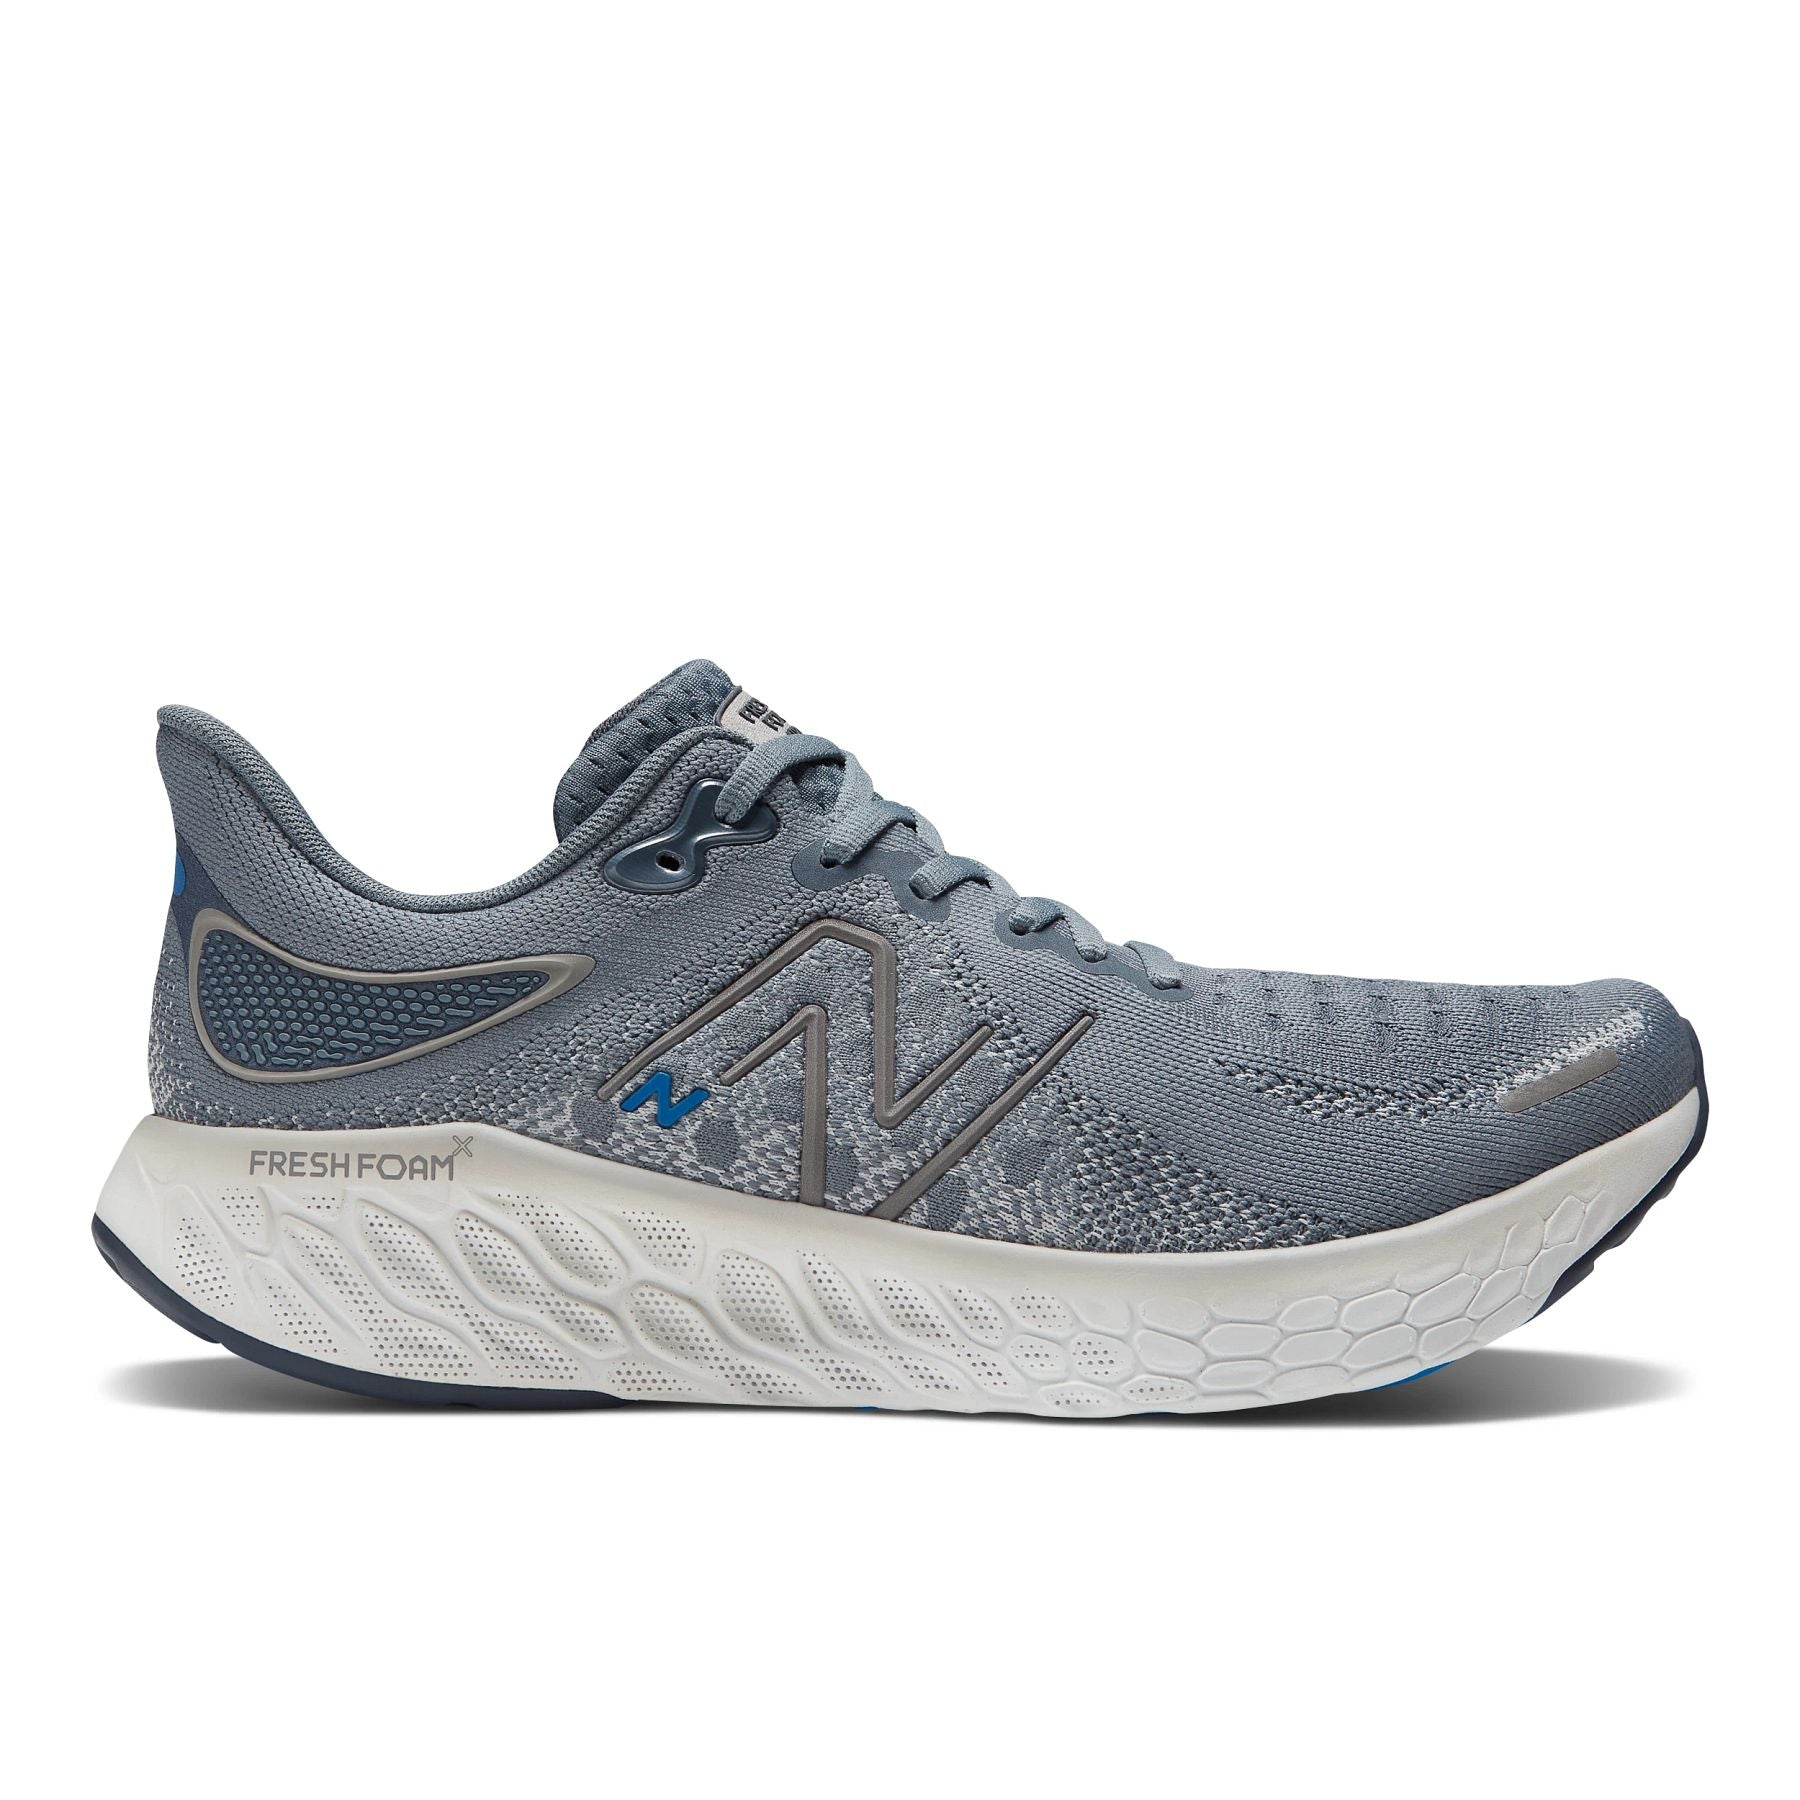 Lateral view of the Men's 1080 V12 by New Balance in Grey